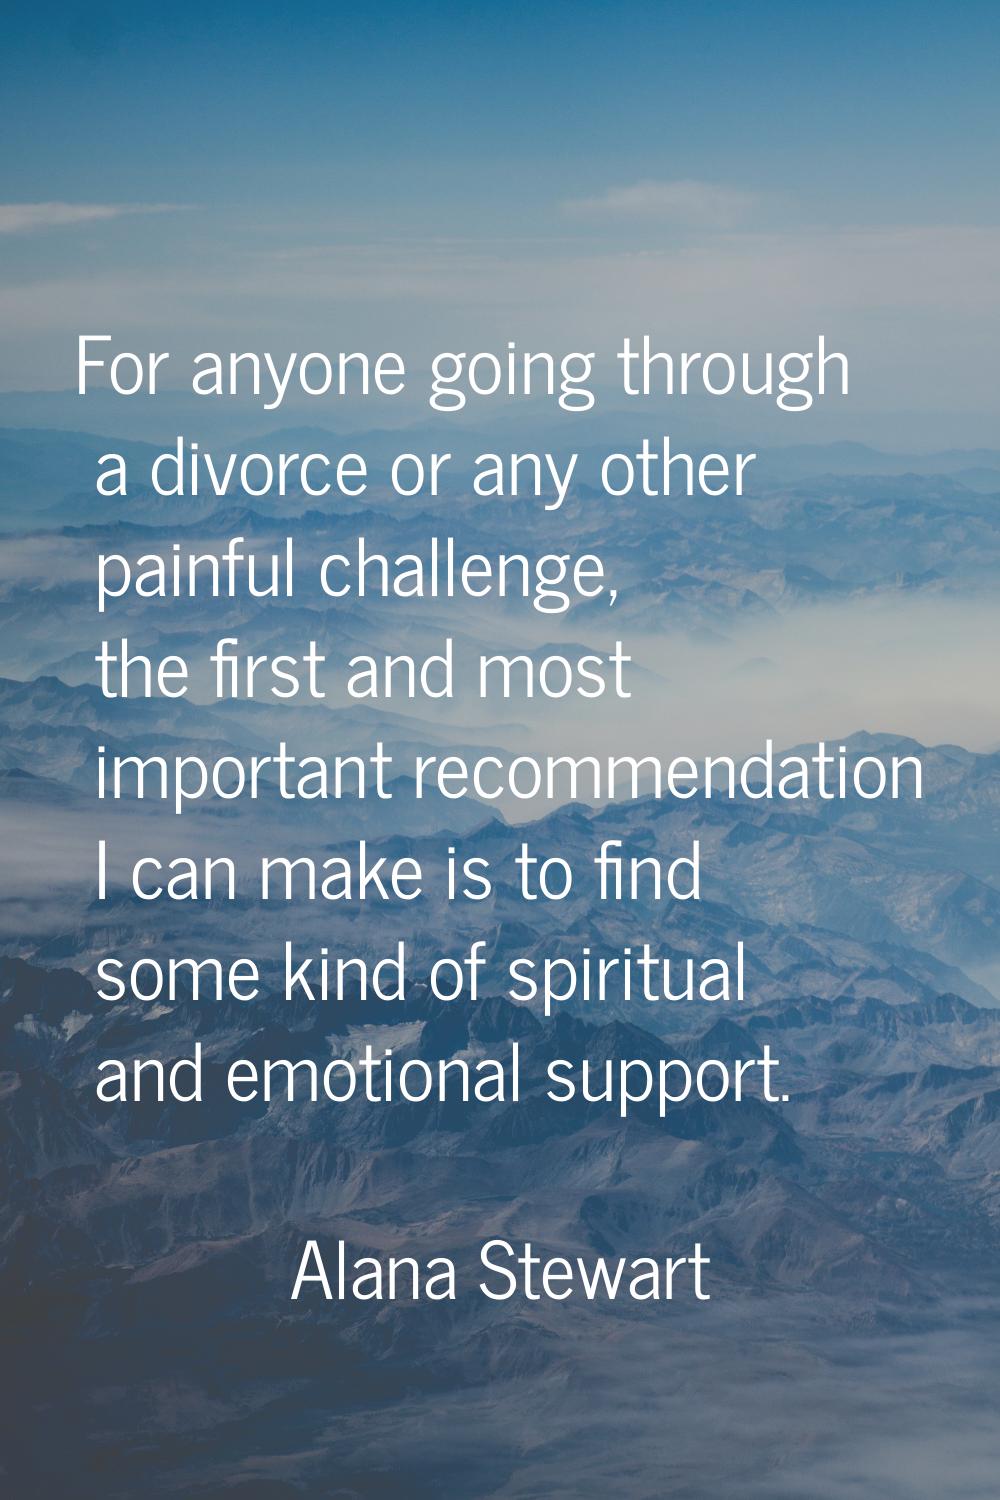 For anyone going through a divorce or any other painful challenge, the first and most important rec